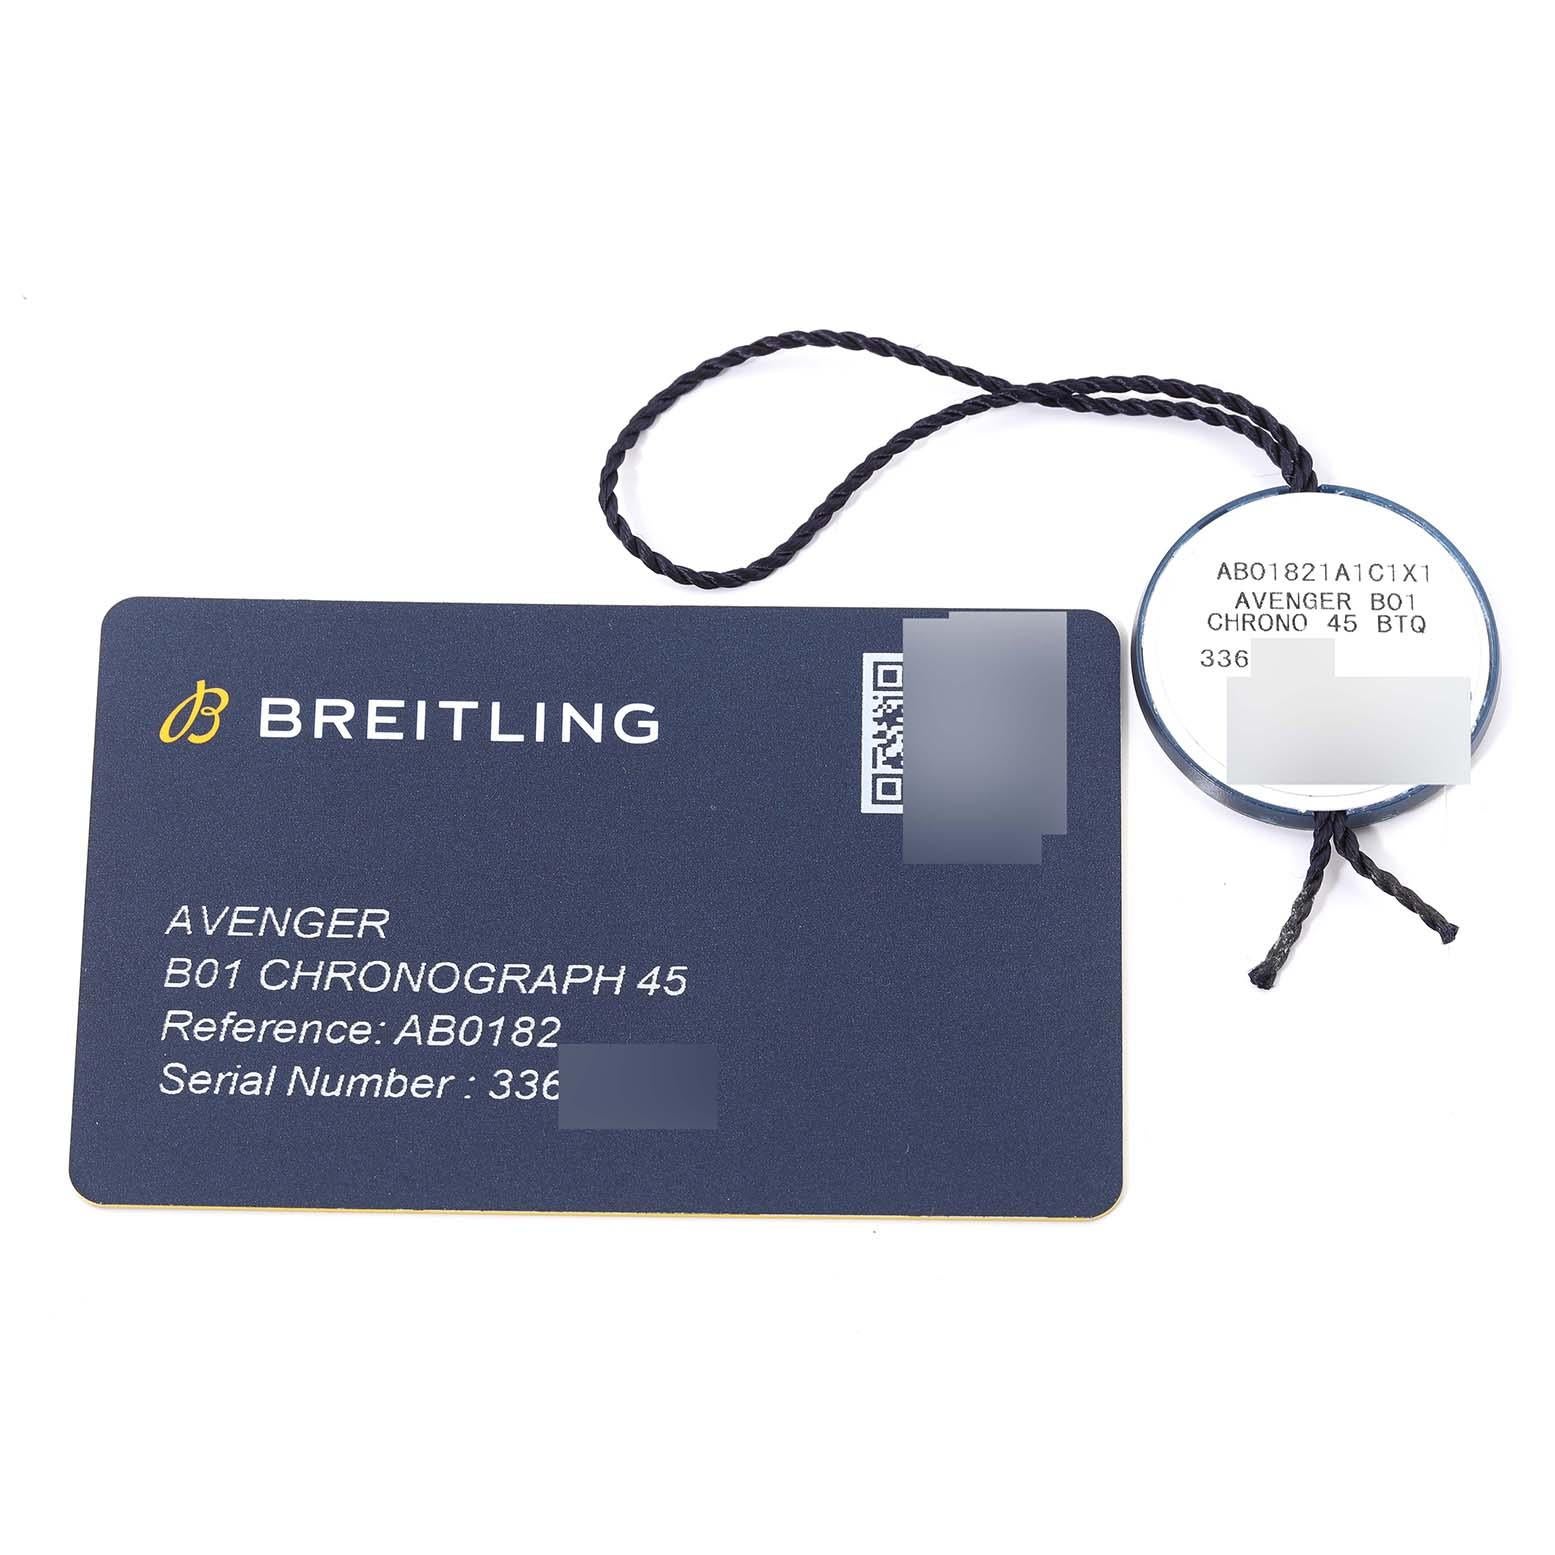 Breitling Avenger B01 Chronograph 45 Steel Mens Watch AB0182 Box Card For Sale 1